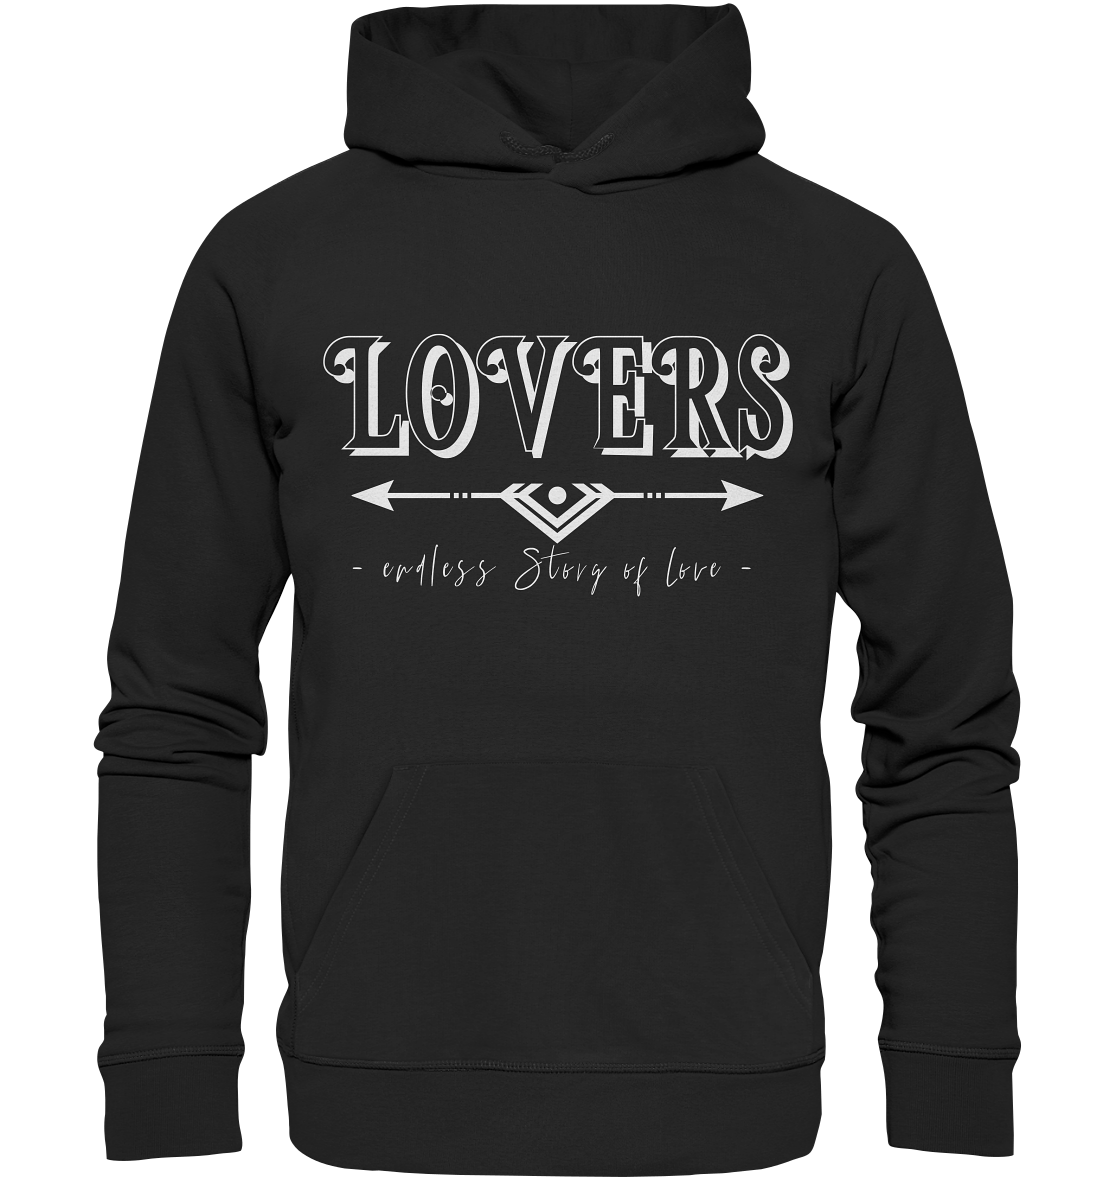 LOVERS endless story of Love Pärchen Pullover endless love